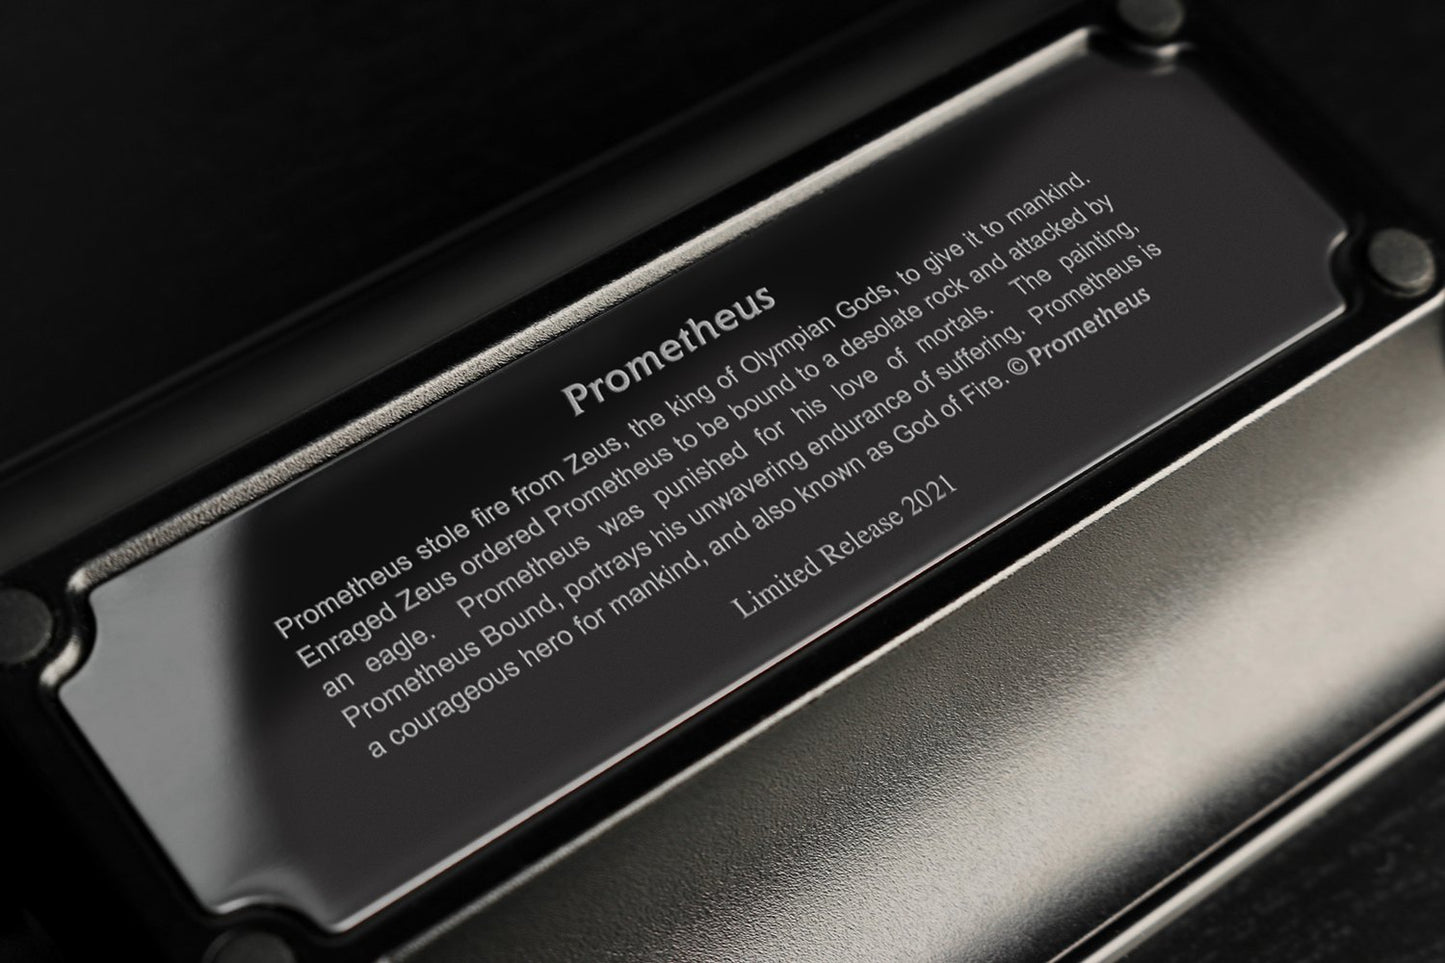 The back of a modern black matte metal ashtray. The brand is Prometheus. The photo describes the life of Greek God Prometheus for which the cigar accessory line was named. Prometheus stole fire from Zeus to give to mankind. 